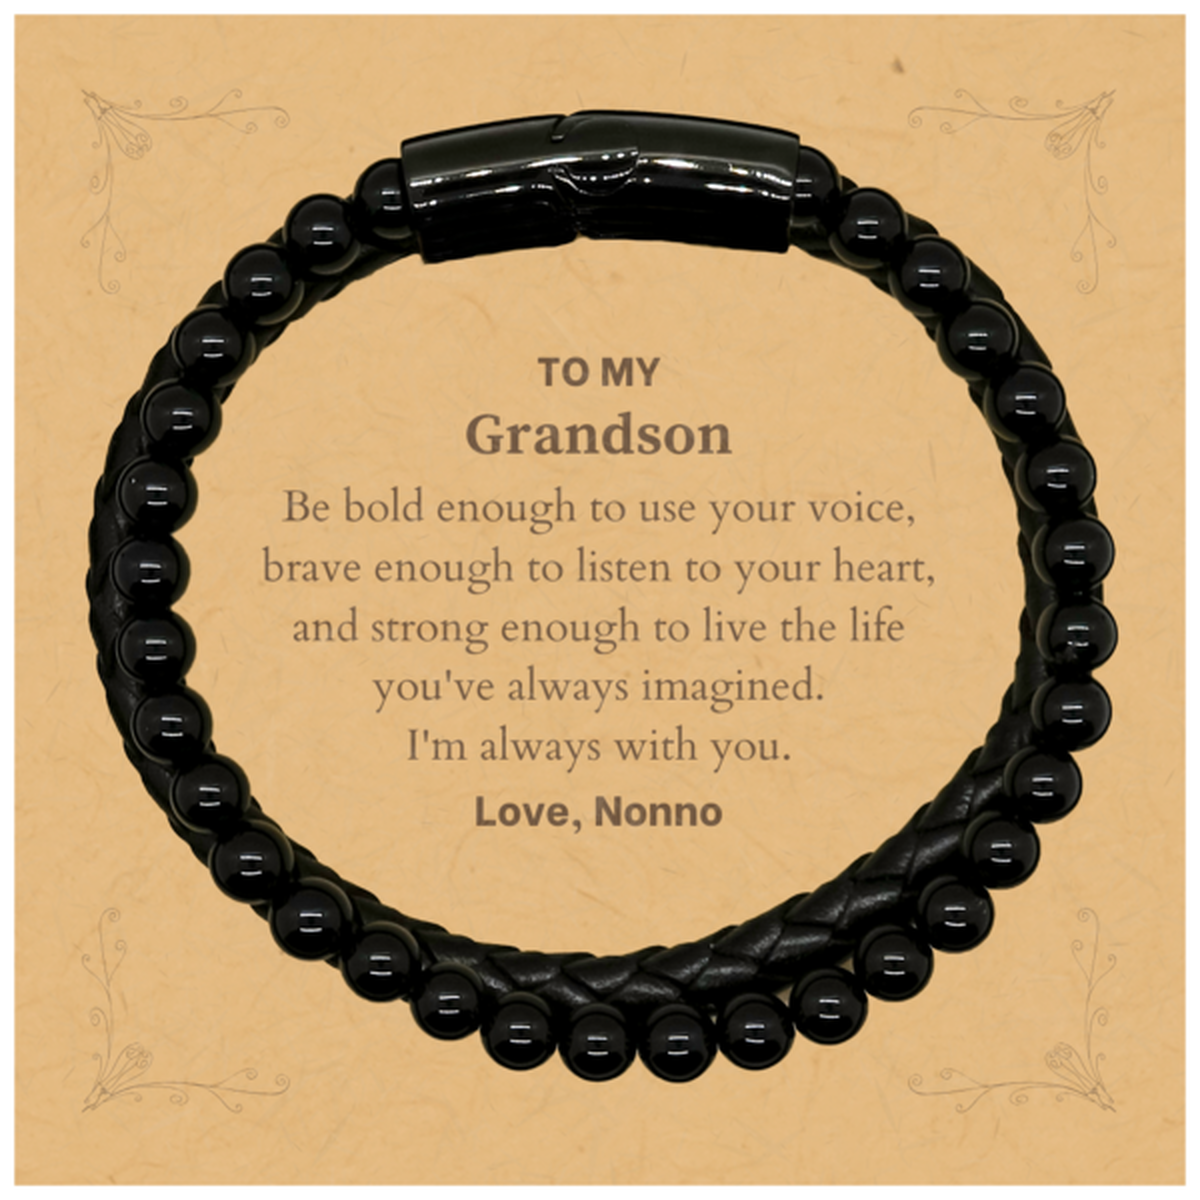 Keepsake Grandson Stone Leather Bracelets Gift Idea Graduation Christmas Birthday Grandson from Nonno, Grandson Be bold enough to use your voice, brave enough to listen to your heart. Love, Nonno